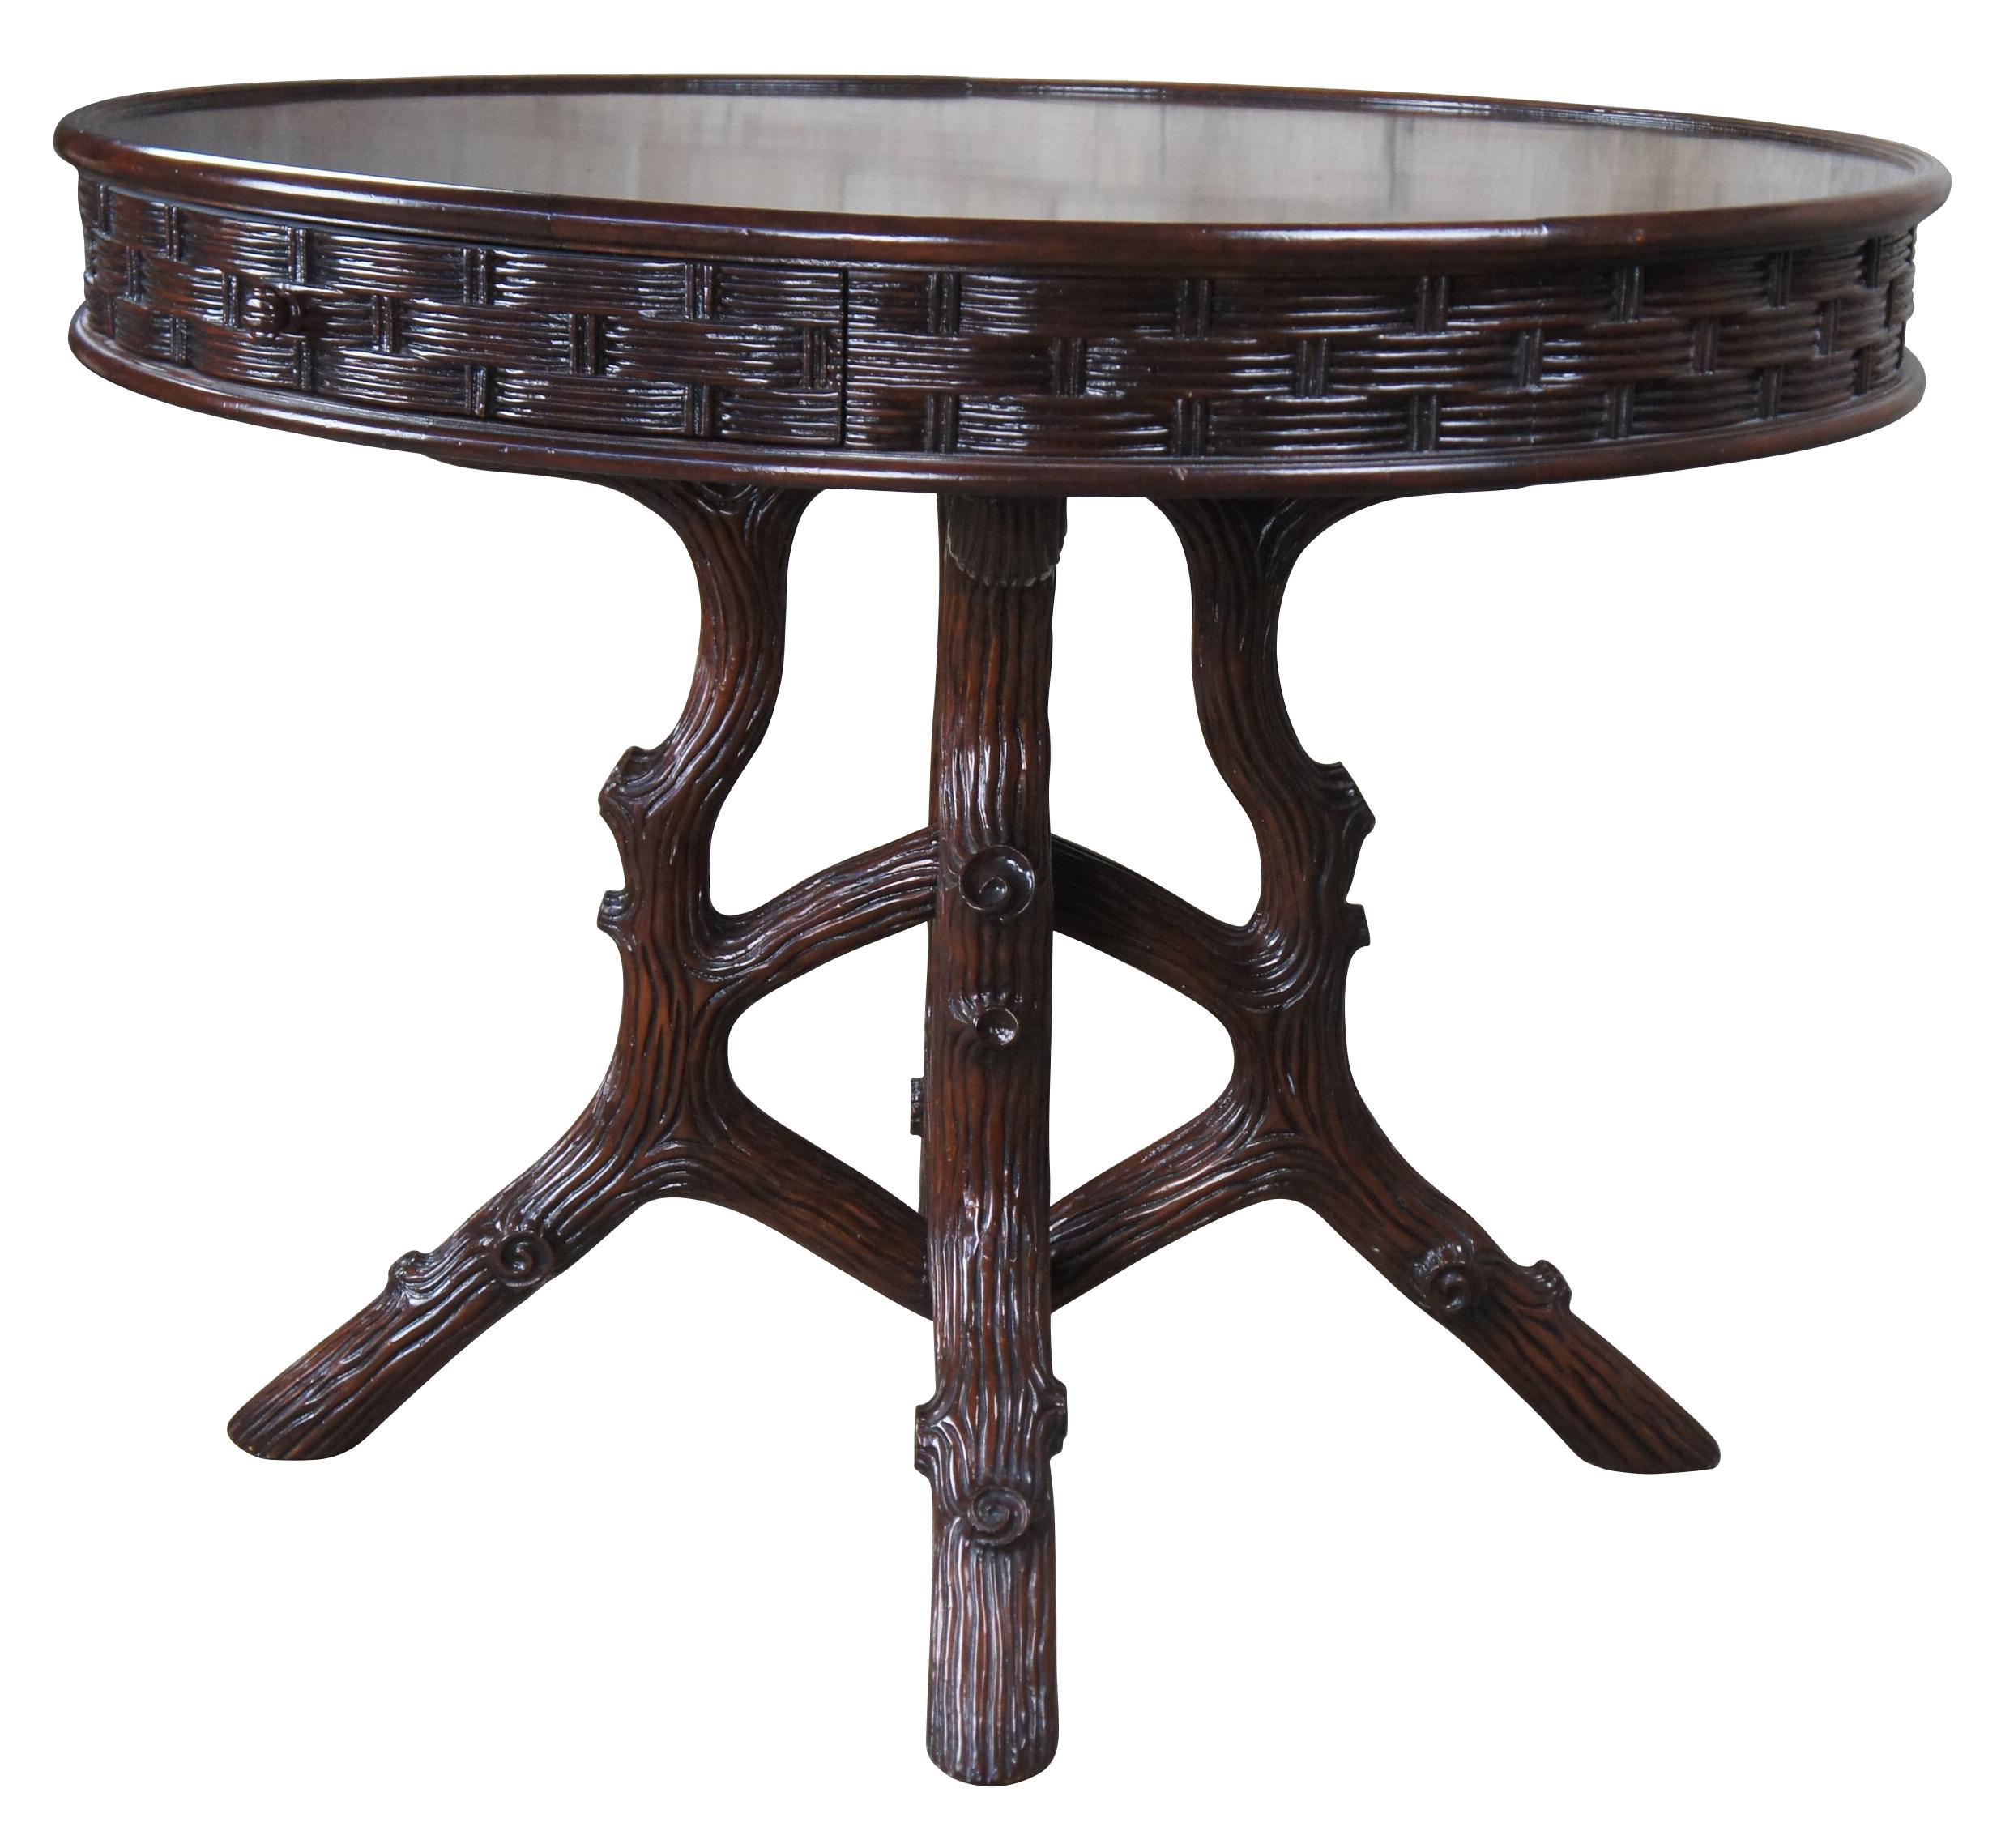 Vintage EJ Victor for Ralph Lauren modern Adirondack center table, circa last quarter 20th century. Made from oak with a warm brown finish. Features a round top with molded basketweave edge and one drawer, over a freeform tree or log molded base. An